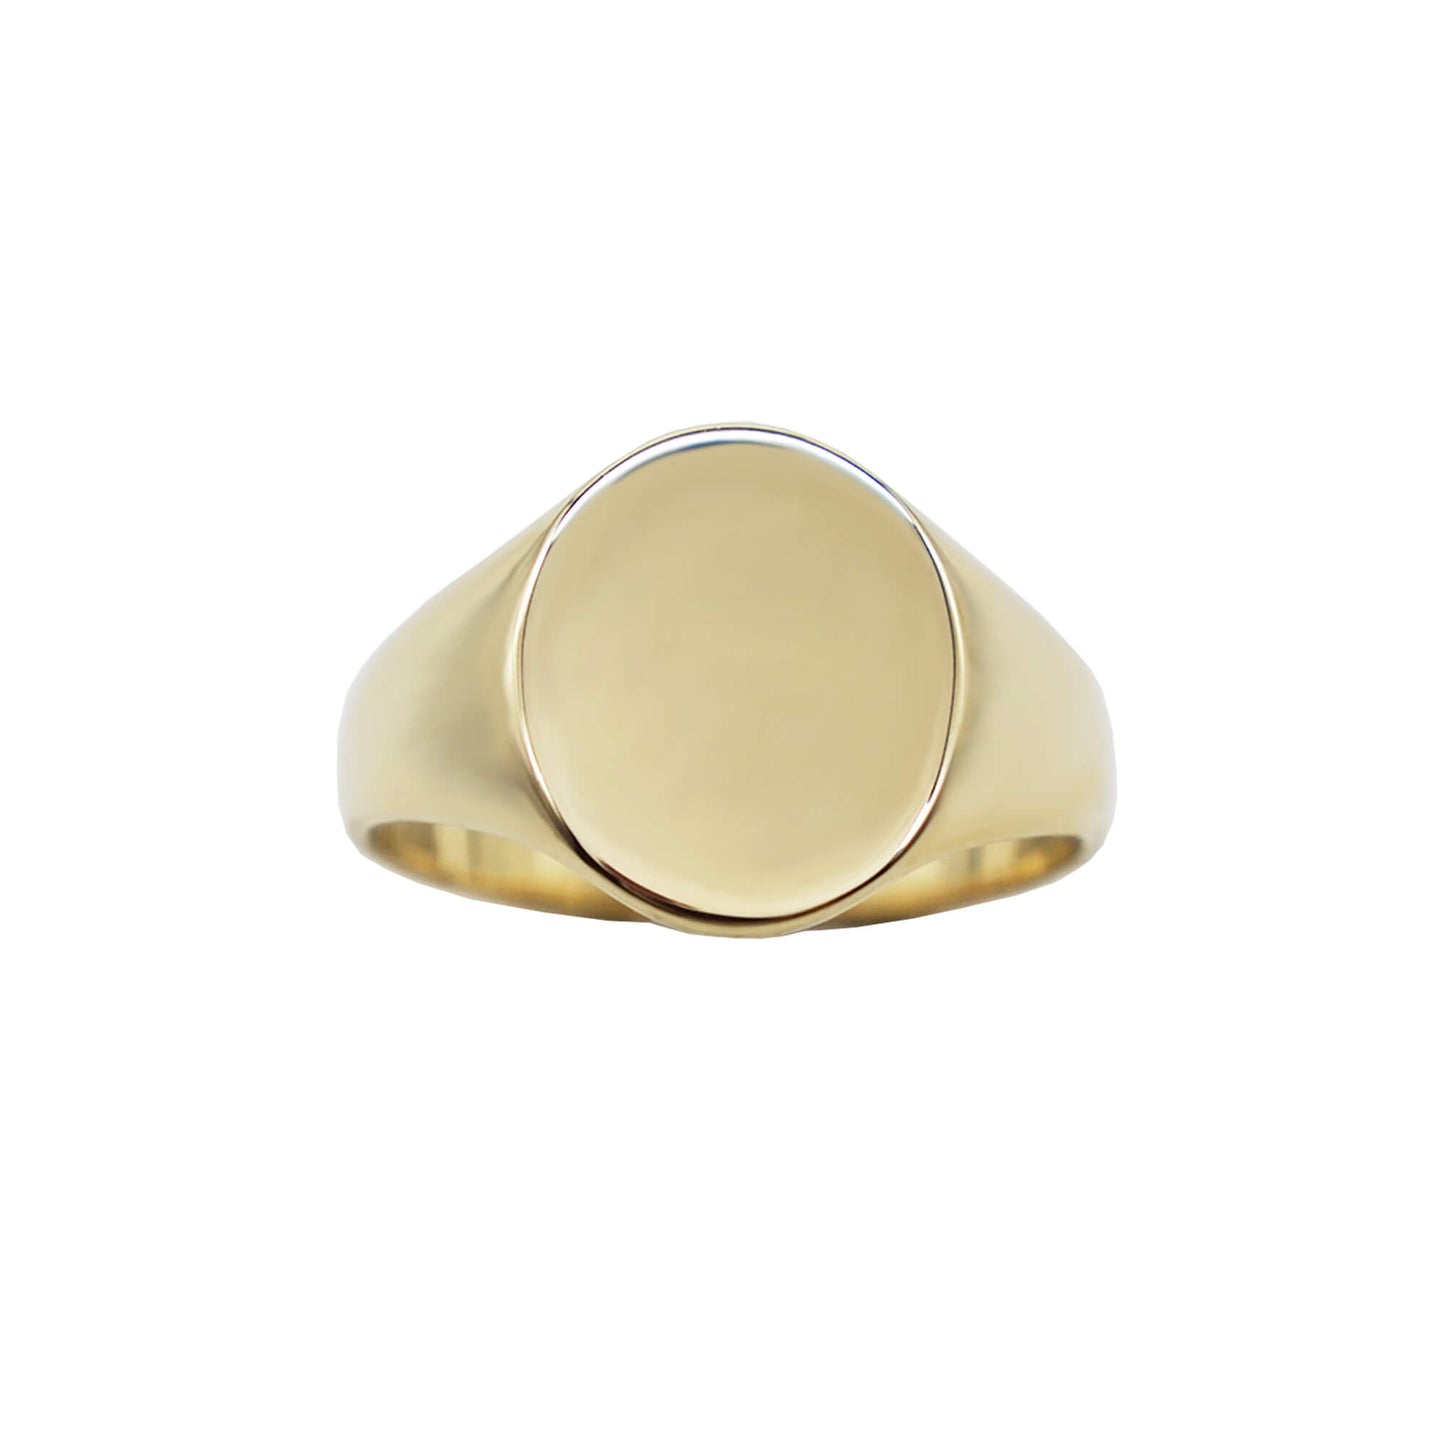 9k gold oval smooth signet ring.